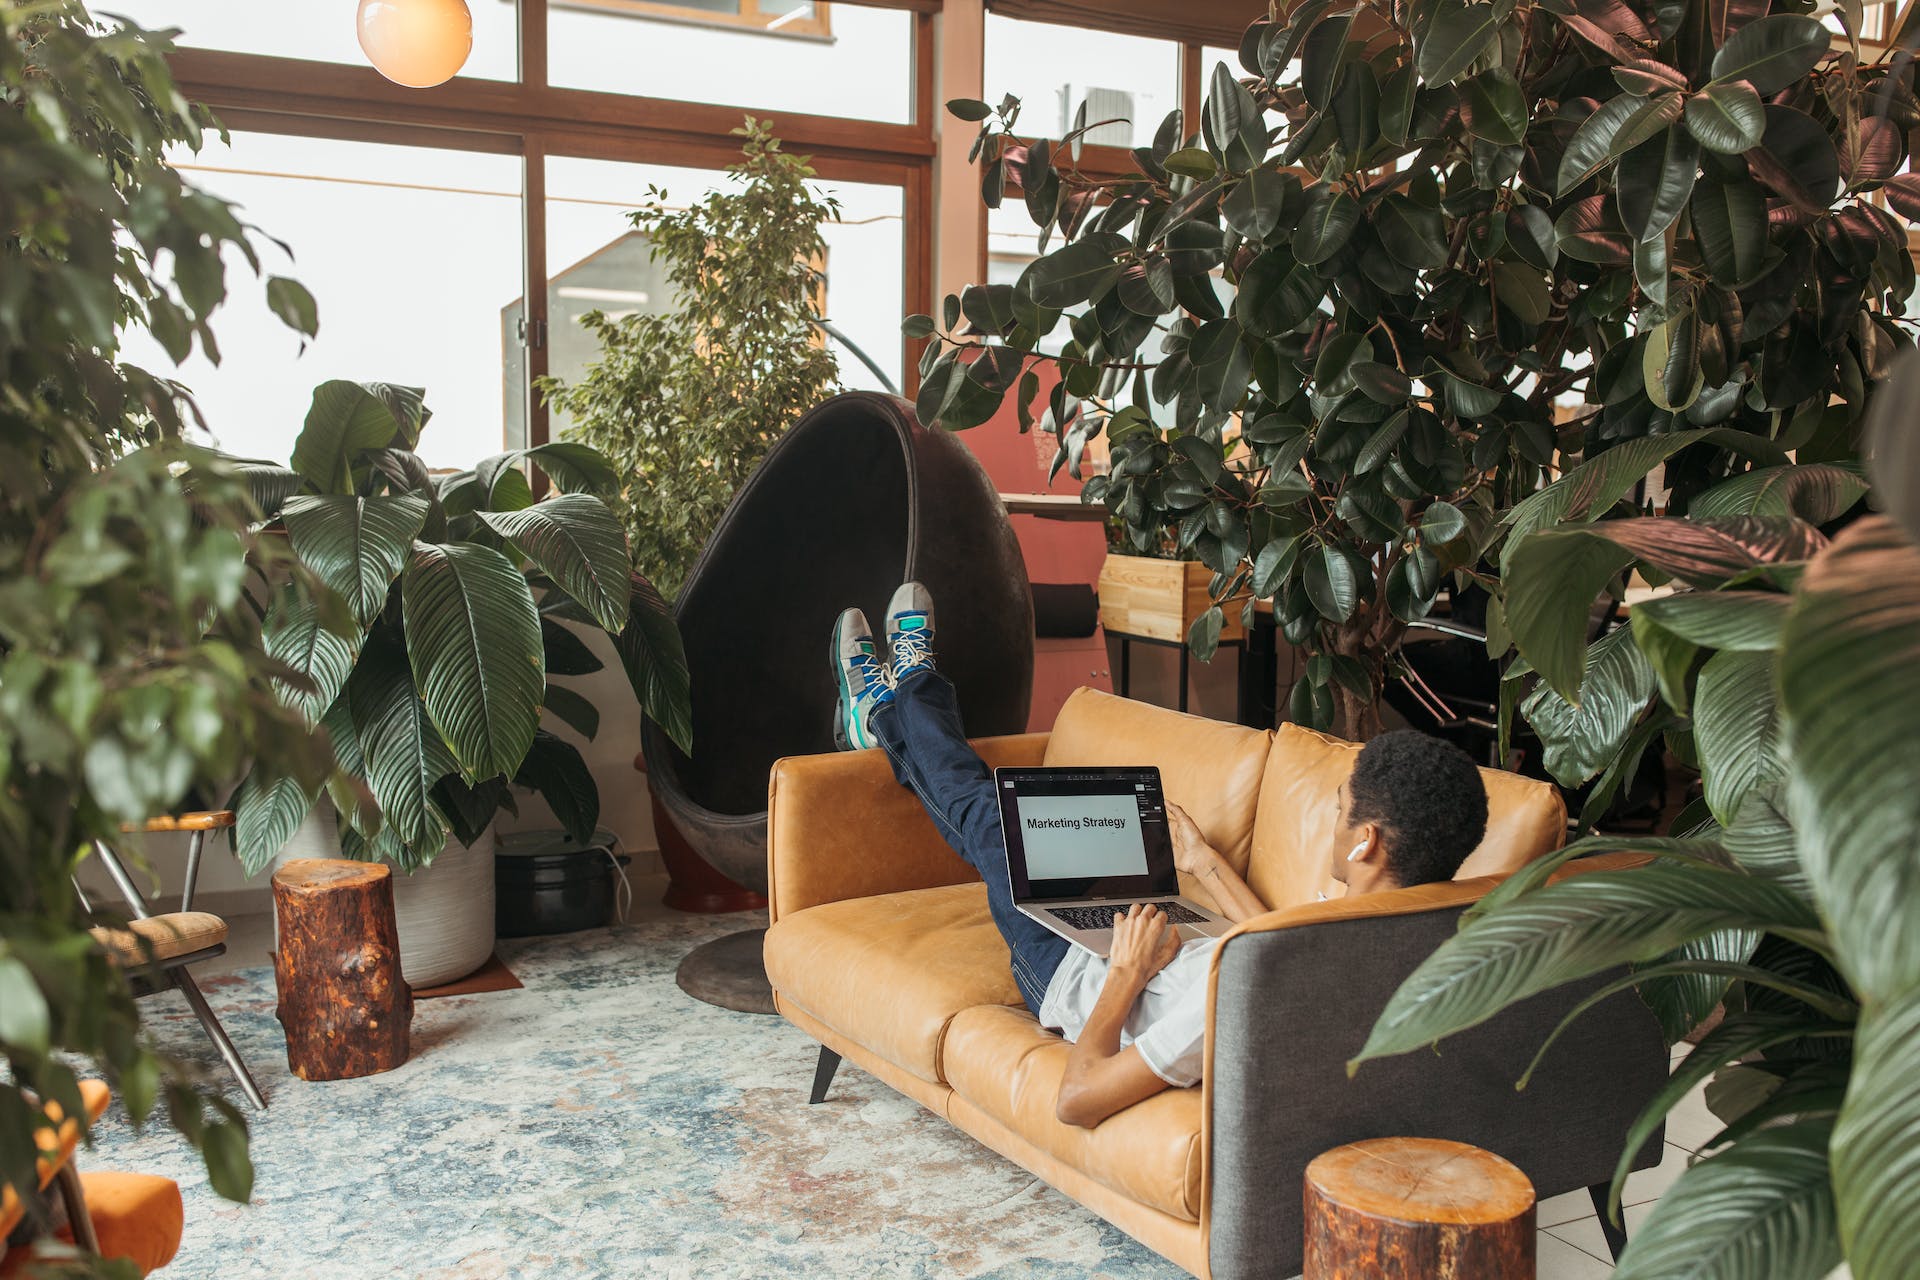 Person lounging on a tan couch in a sunlit room filled with lush green plants, intently reading a laptop screen displaying 'Marketing Strategy', embodying the concept 'Embrace the Process'.